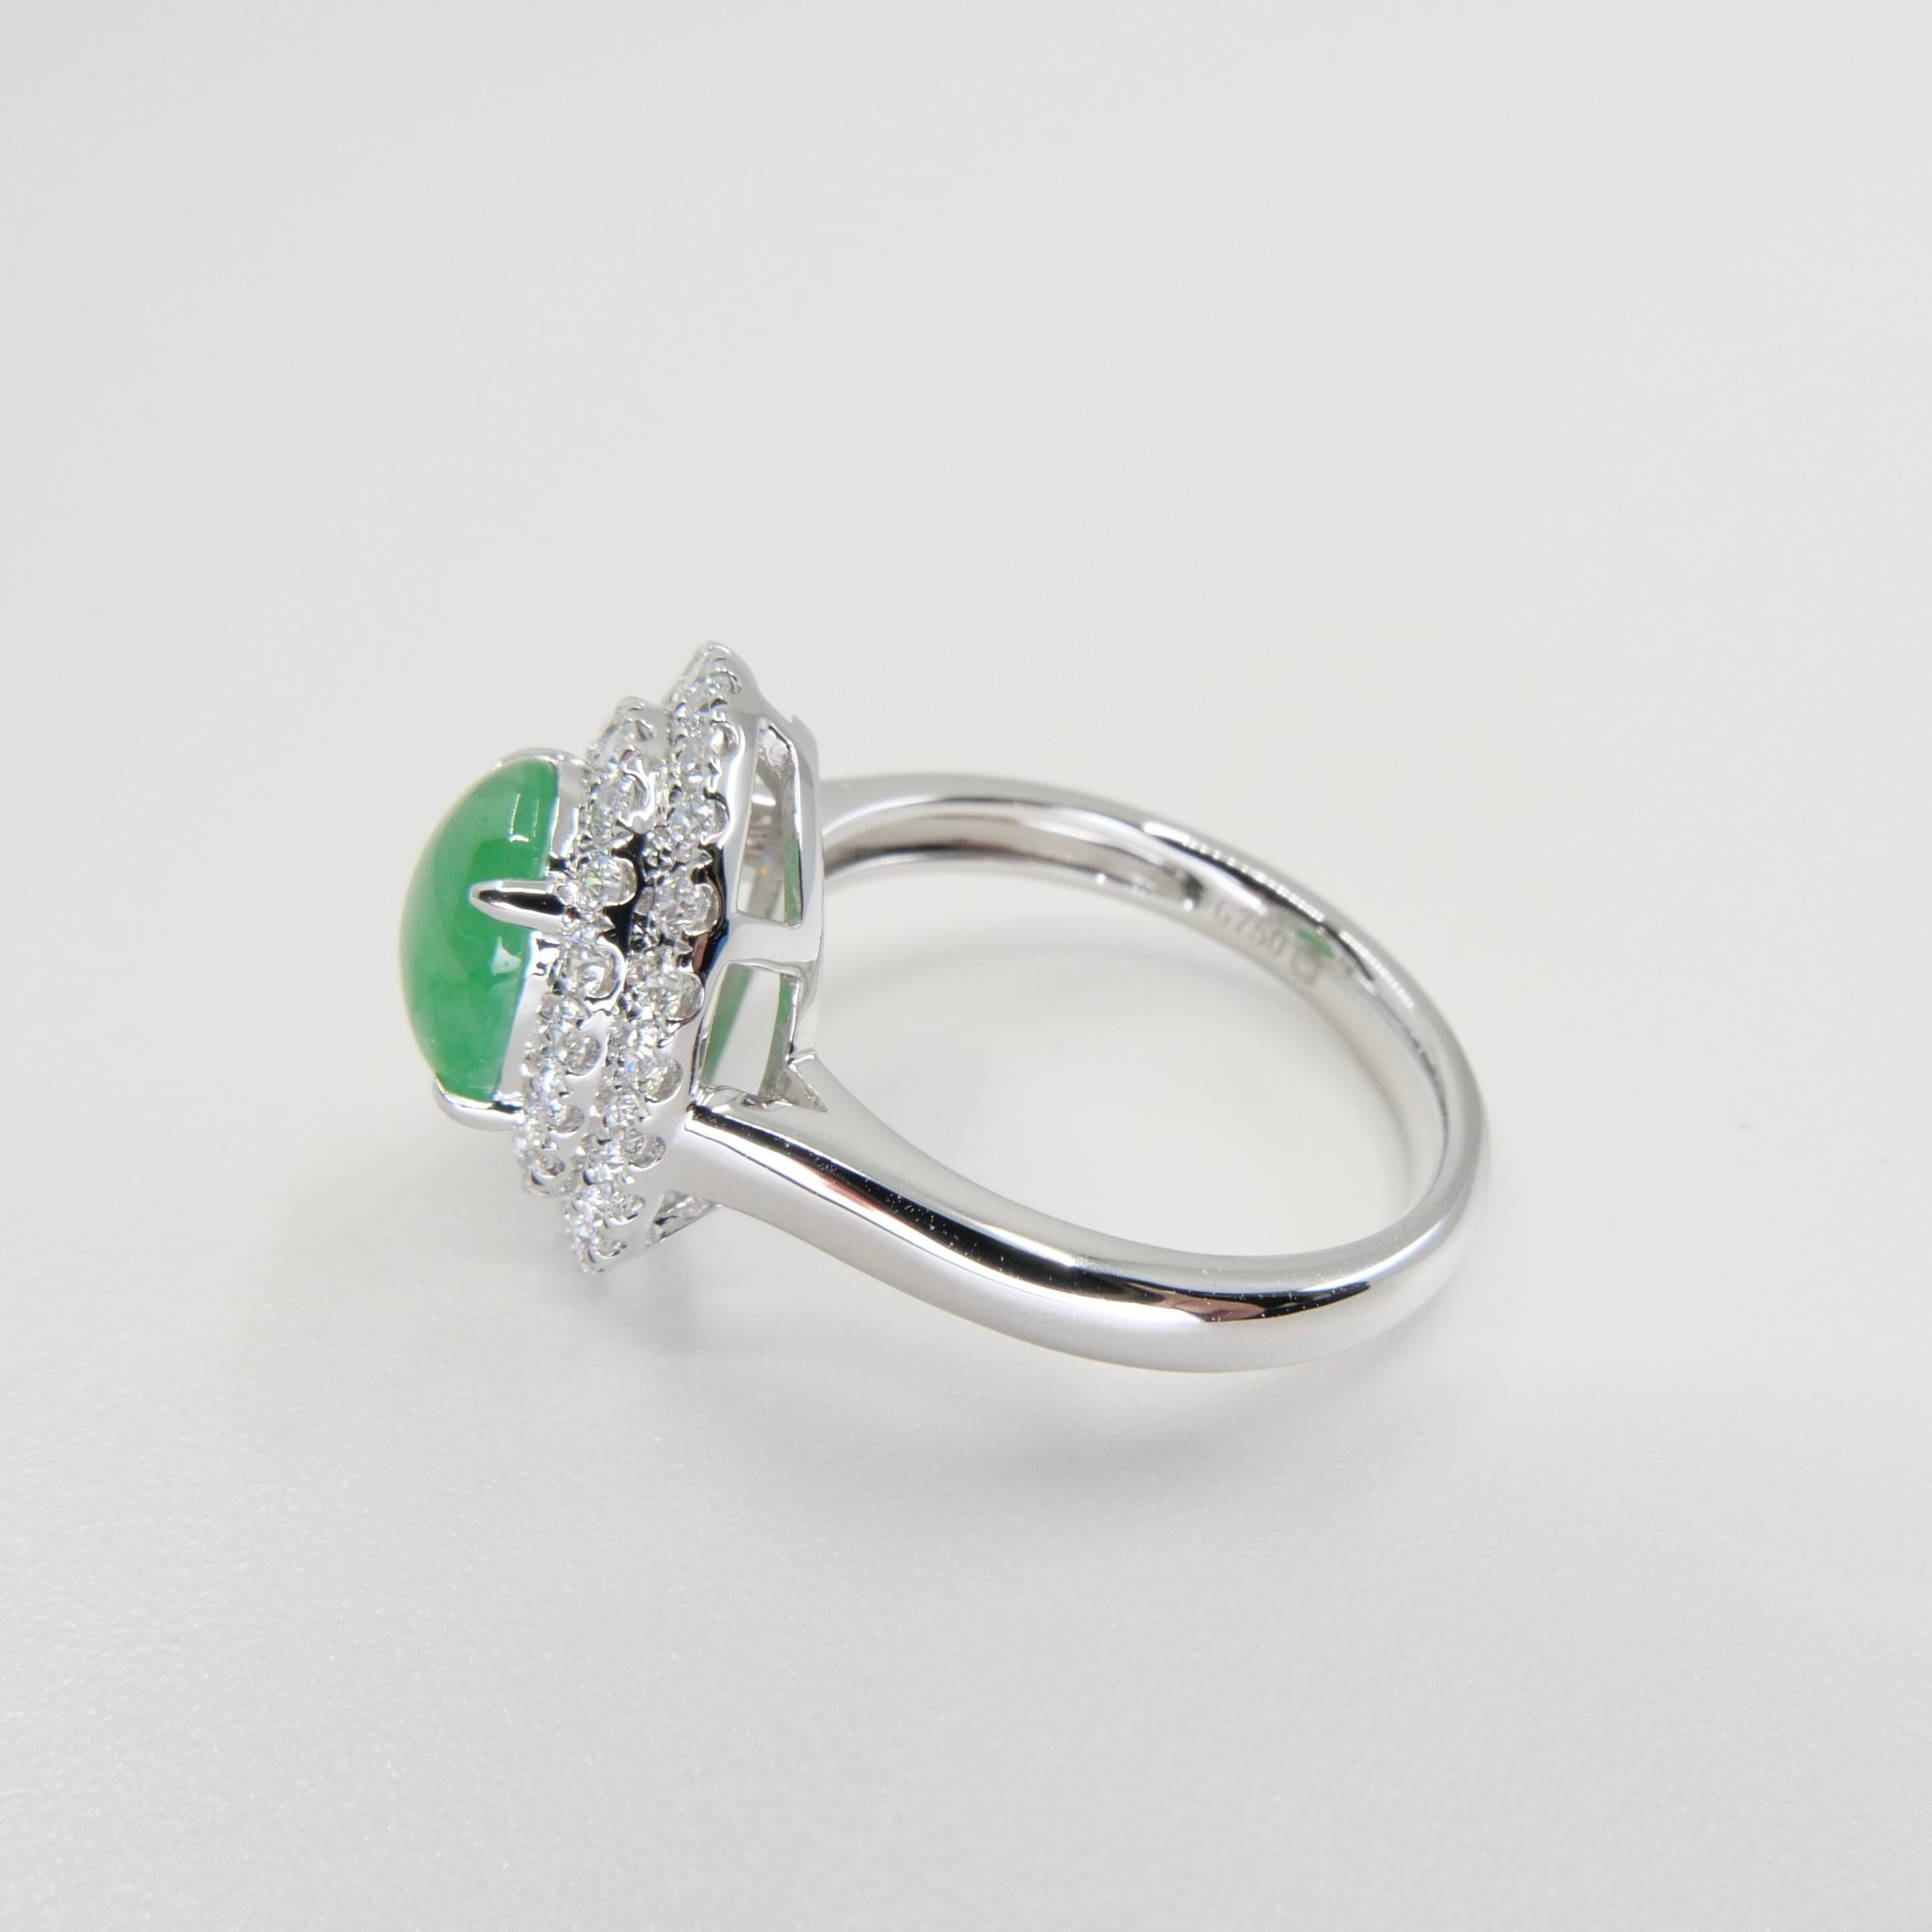 Certified 1.59 Carat Natural Jade & Diamond Cocktail Ring, Apple Green Color For Sale 9